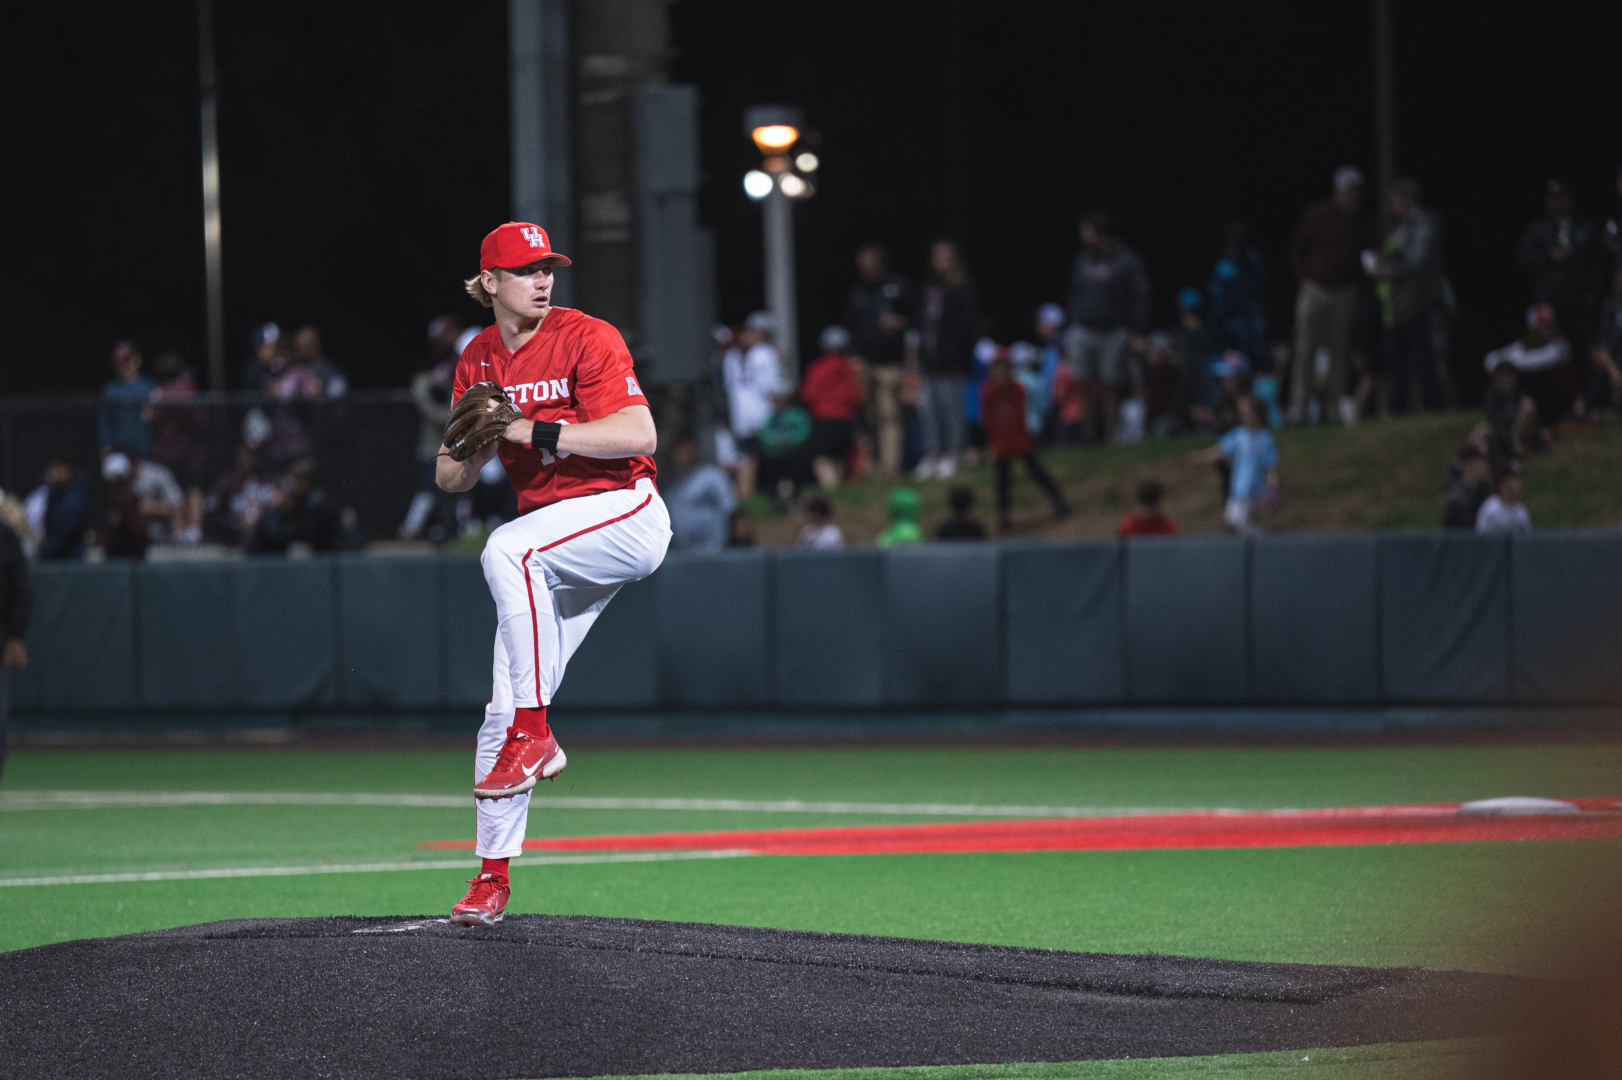 UH right-handed pitcher Josh Ekness gave up two runs in the Cougars' loss to Texas A&M on Tuesday night at Schroeder Park. | Xavier Rosales/The Cougar